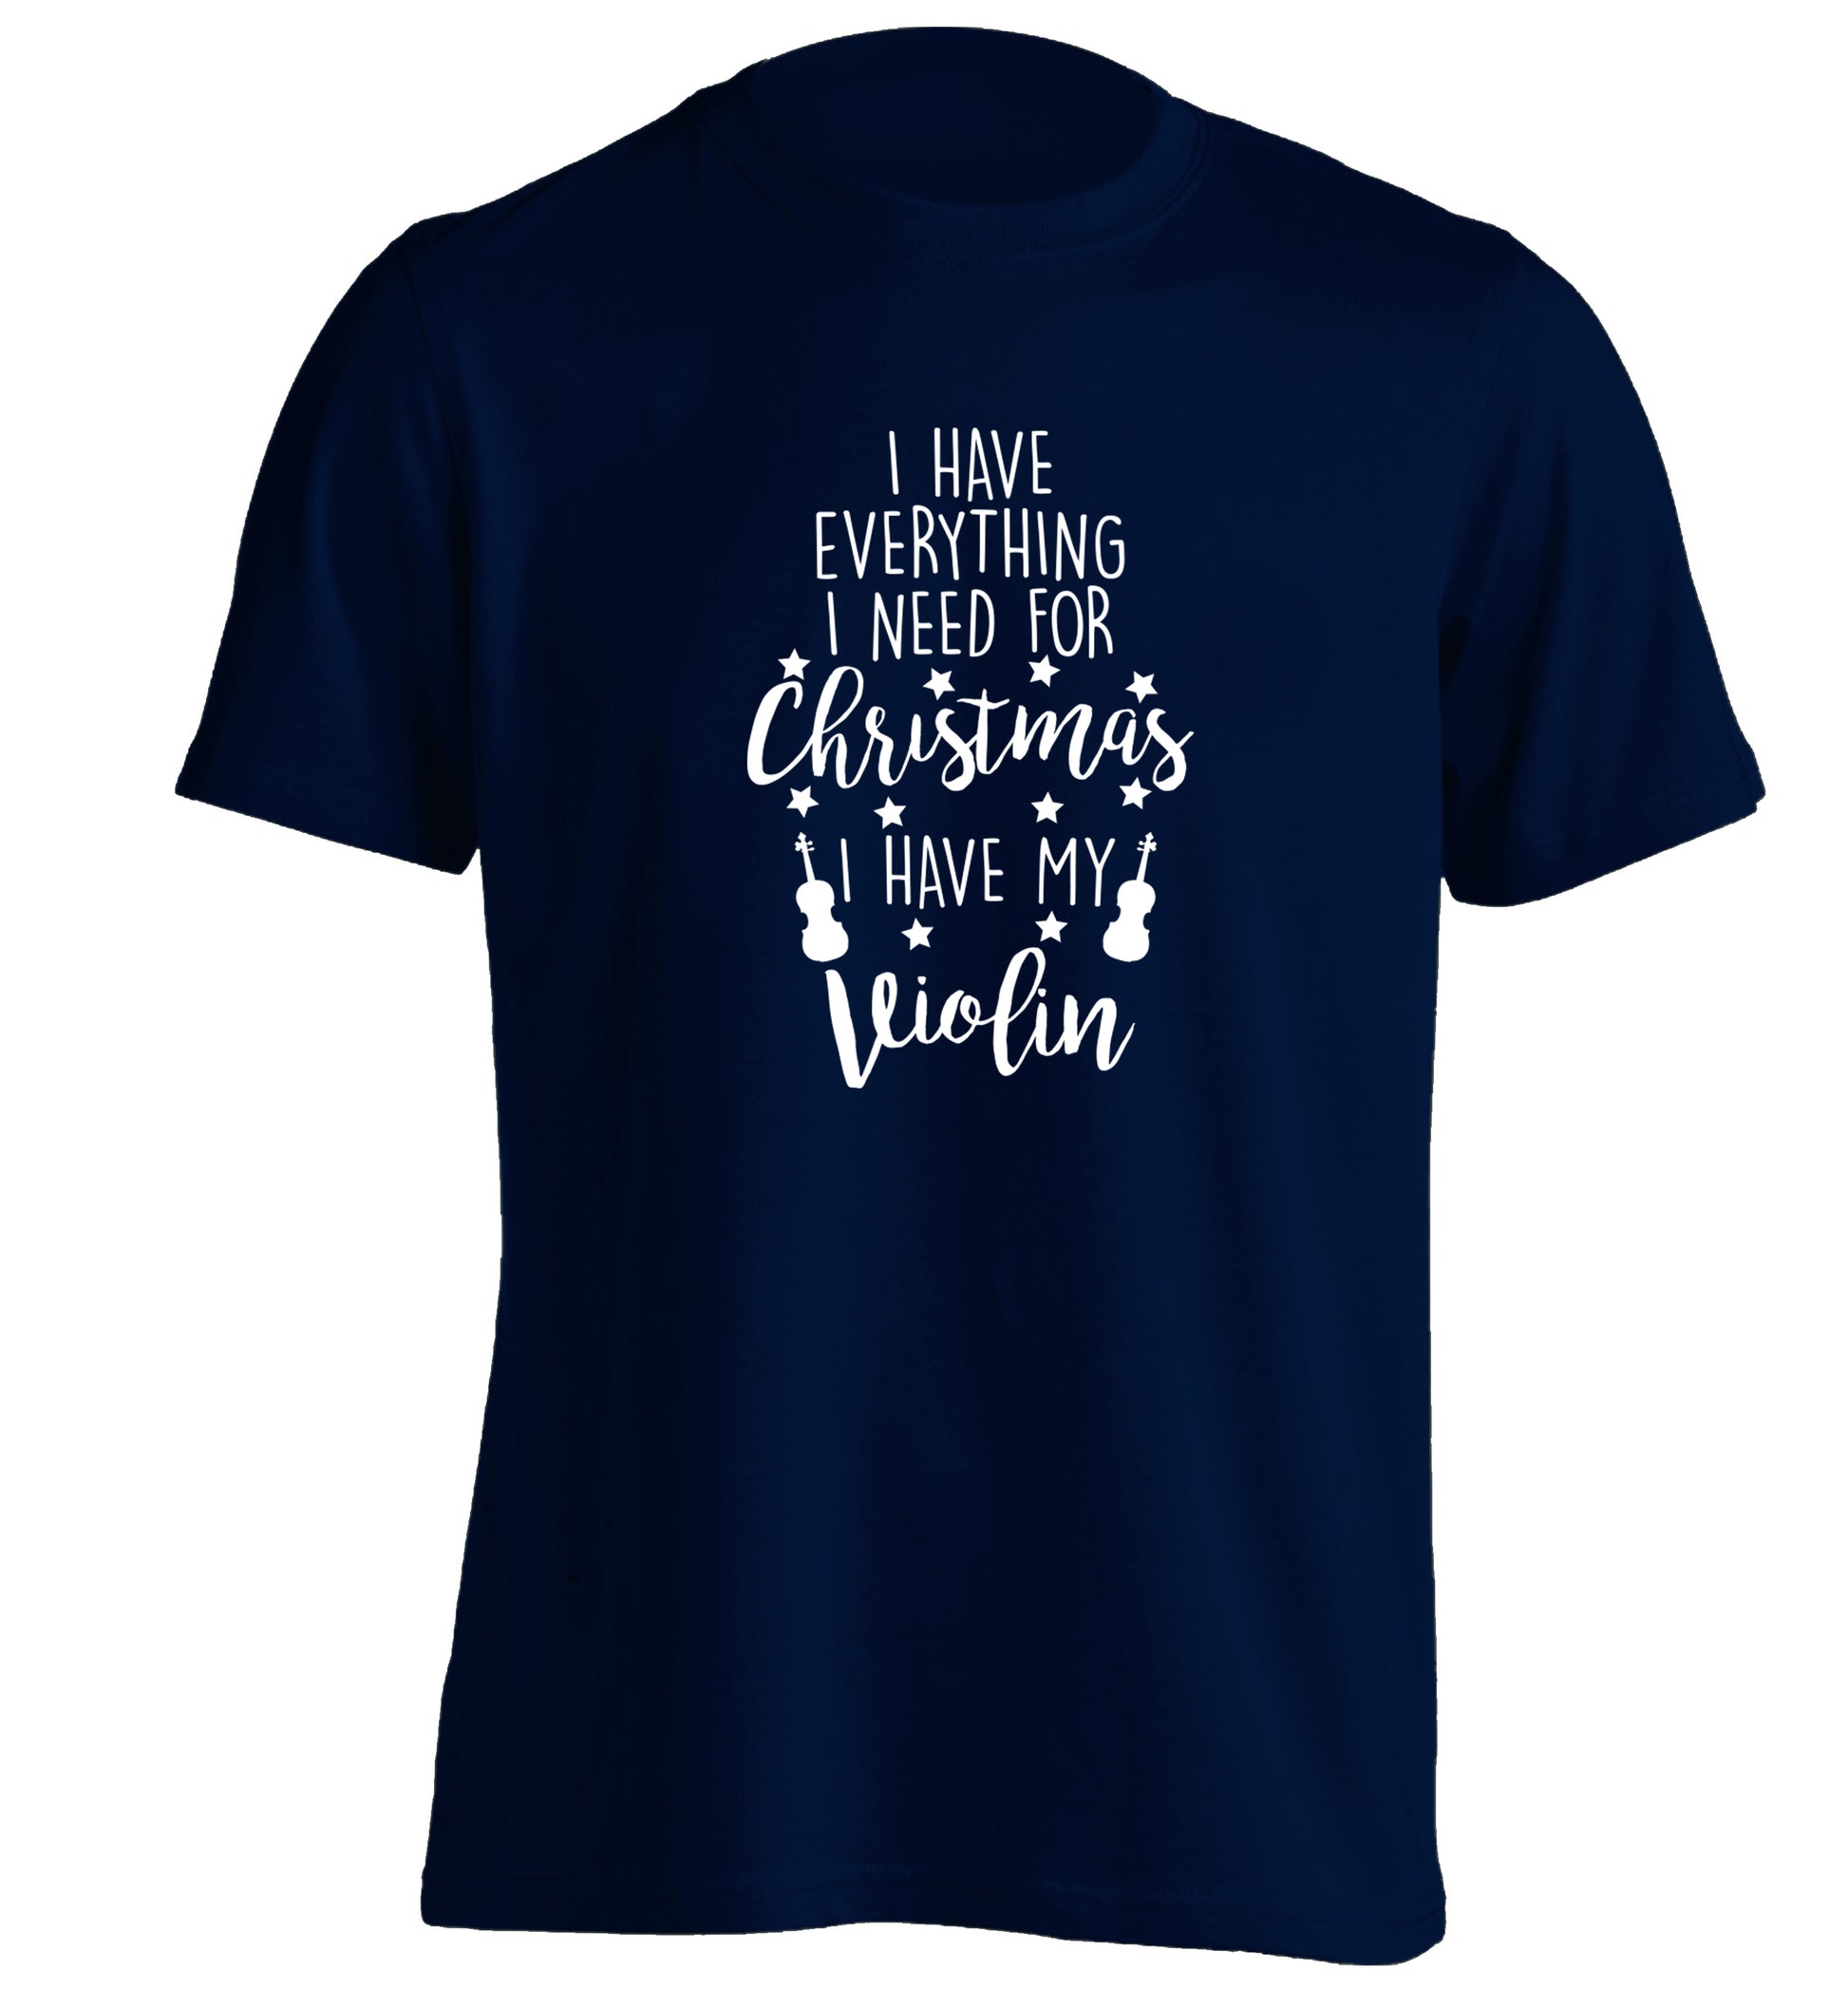 I have everything I need for Christmas I have my violin adults unisex navy Tshirt 2XL